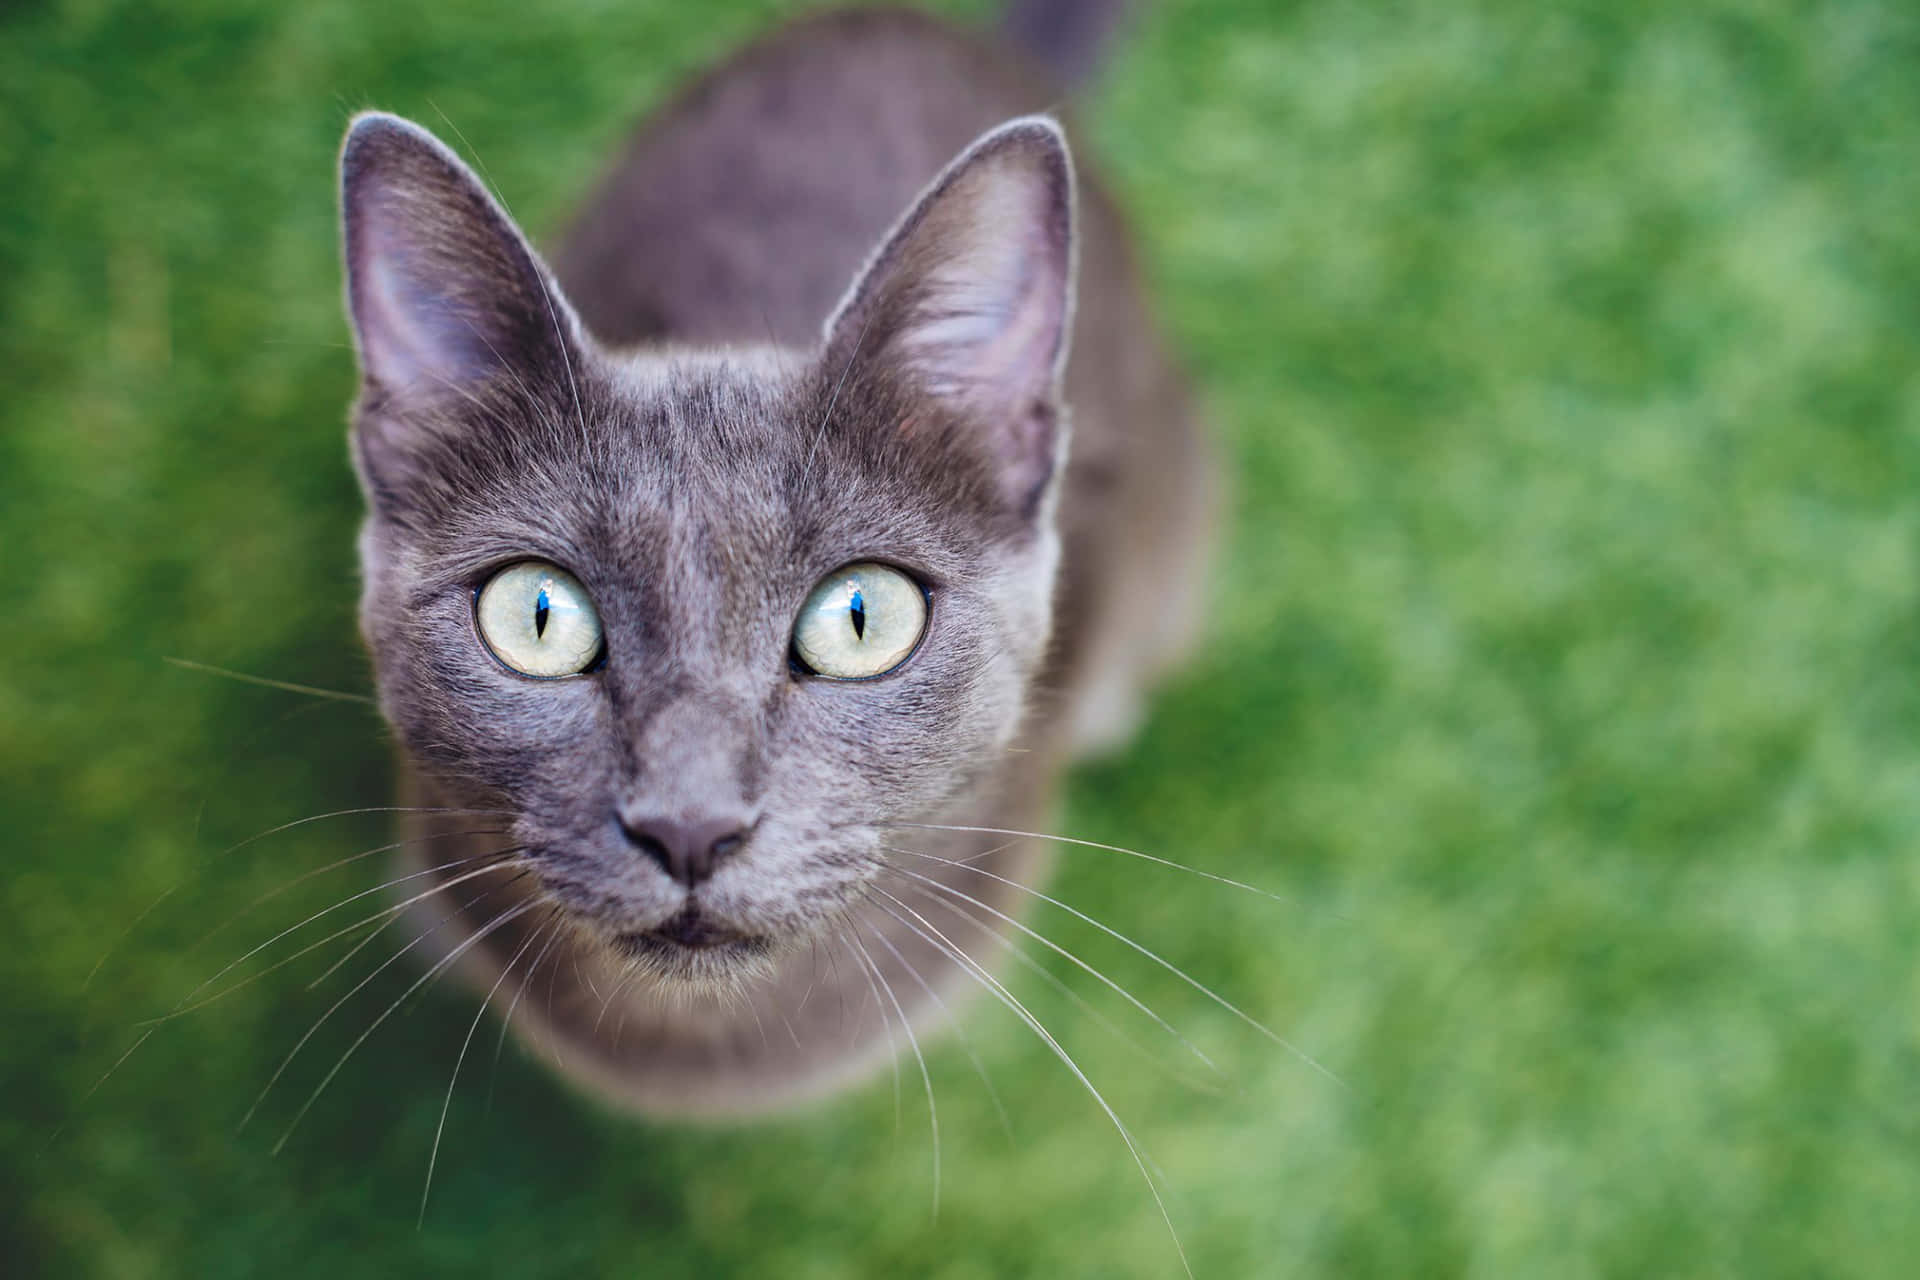 A Gray Cat Is Looking Up At The Camera